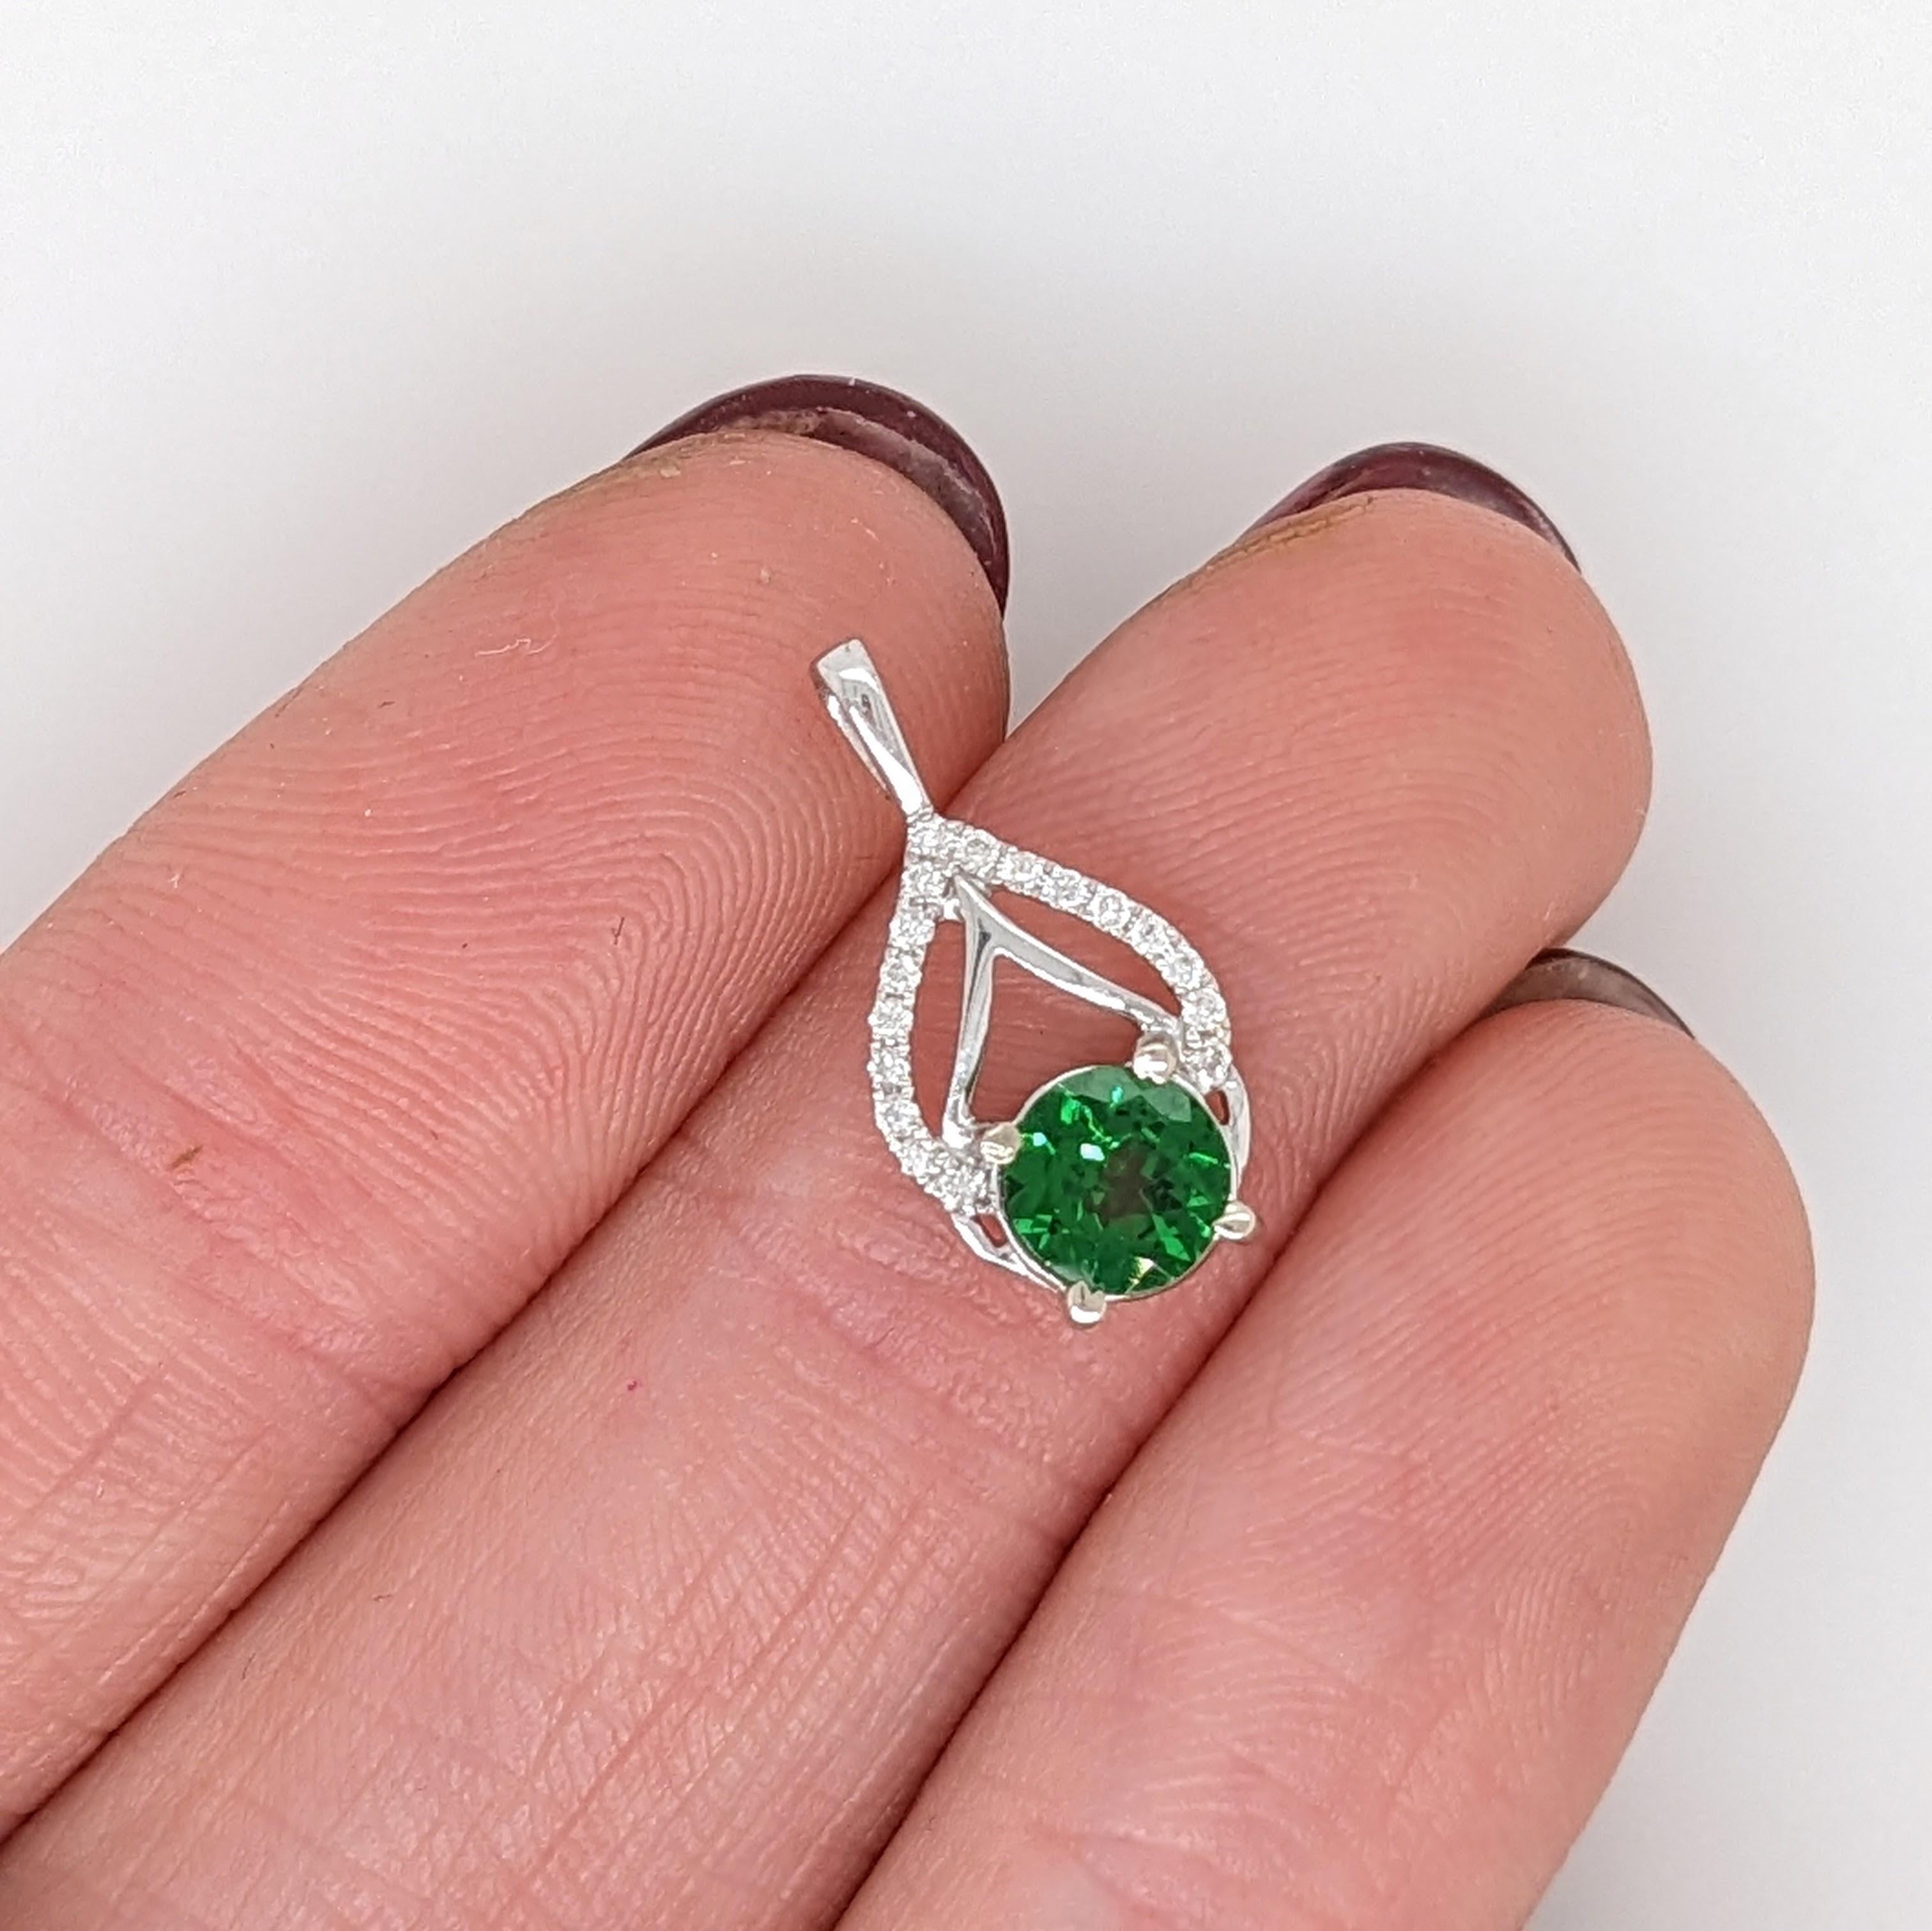 This beautiful pendant features a sparkling light green 0.56ct tsavorite pendant with natural earth-mined diamonds in solid 14k white gold. A unique pendant design to add to your collection and for everyday wear! Tsavorite being a type of a garnet